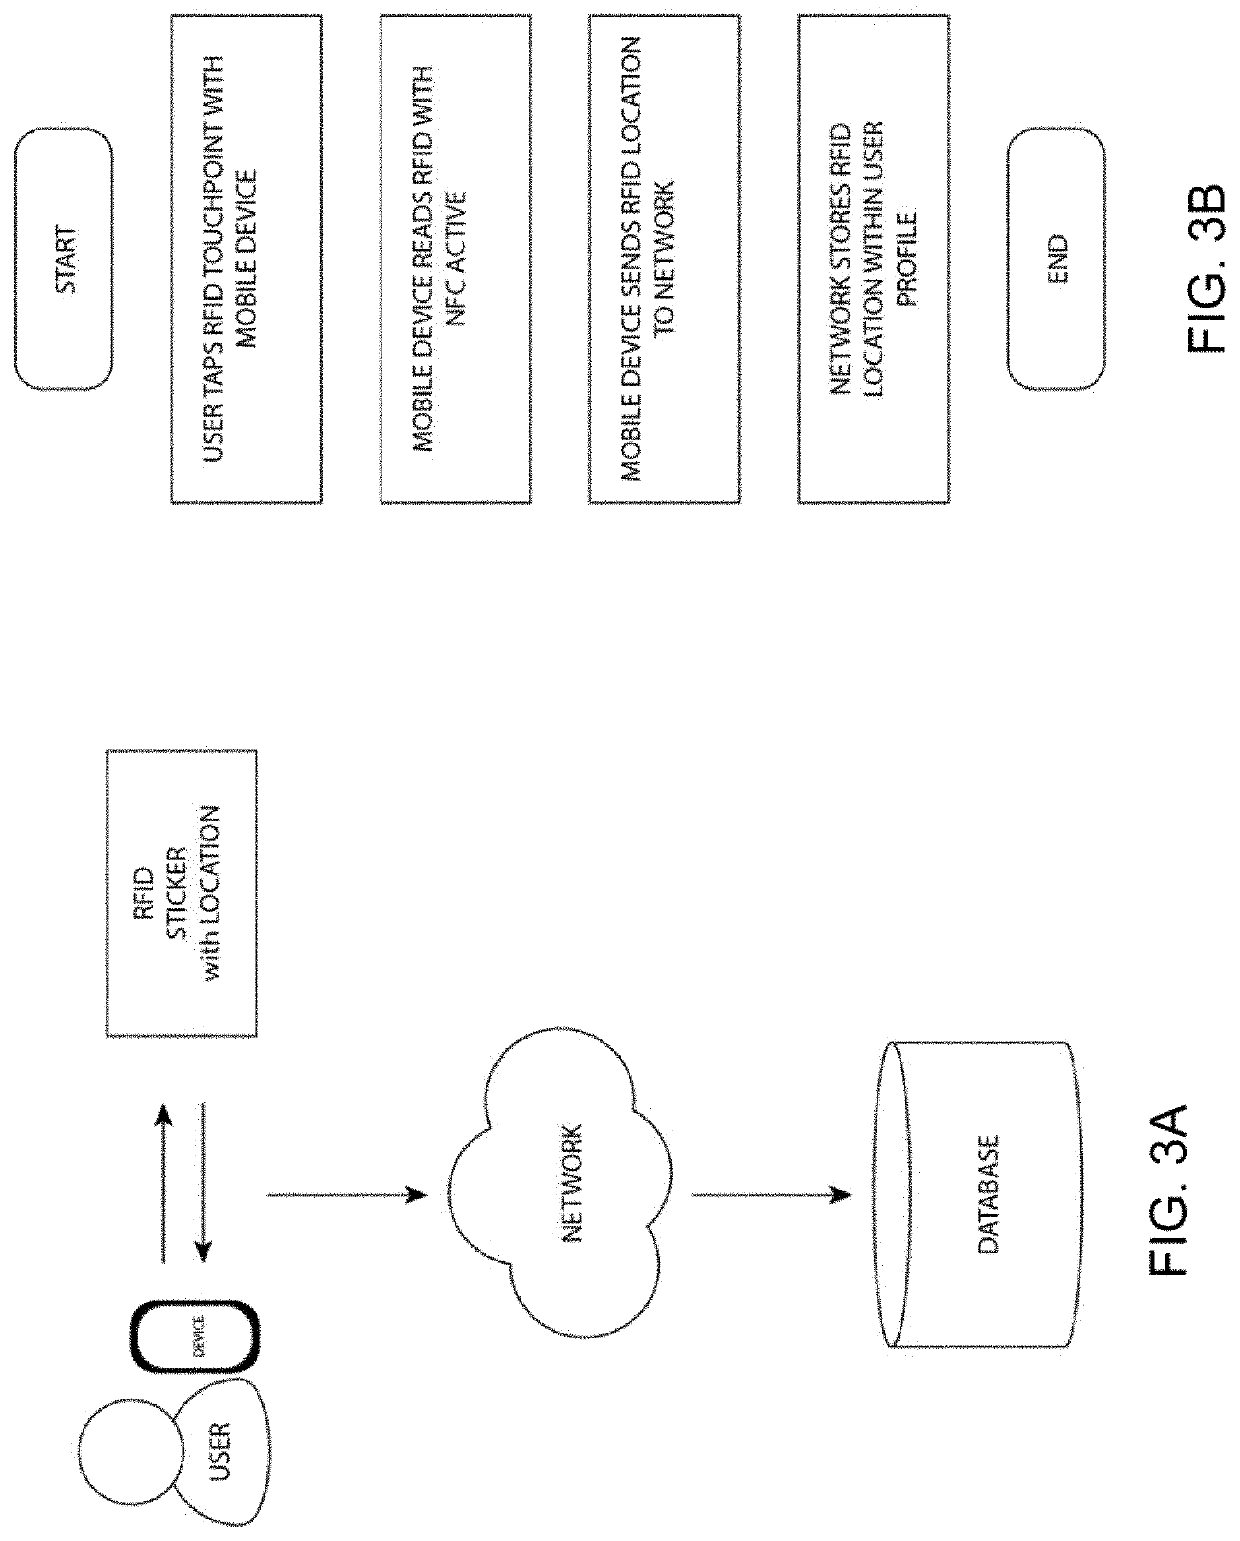 Use of gesture-based NFC interaction to trigger device functionality